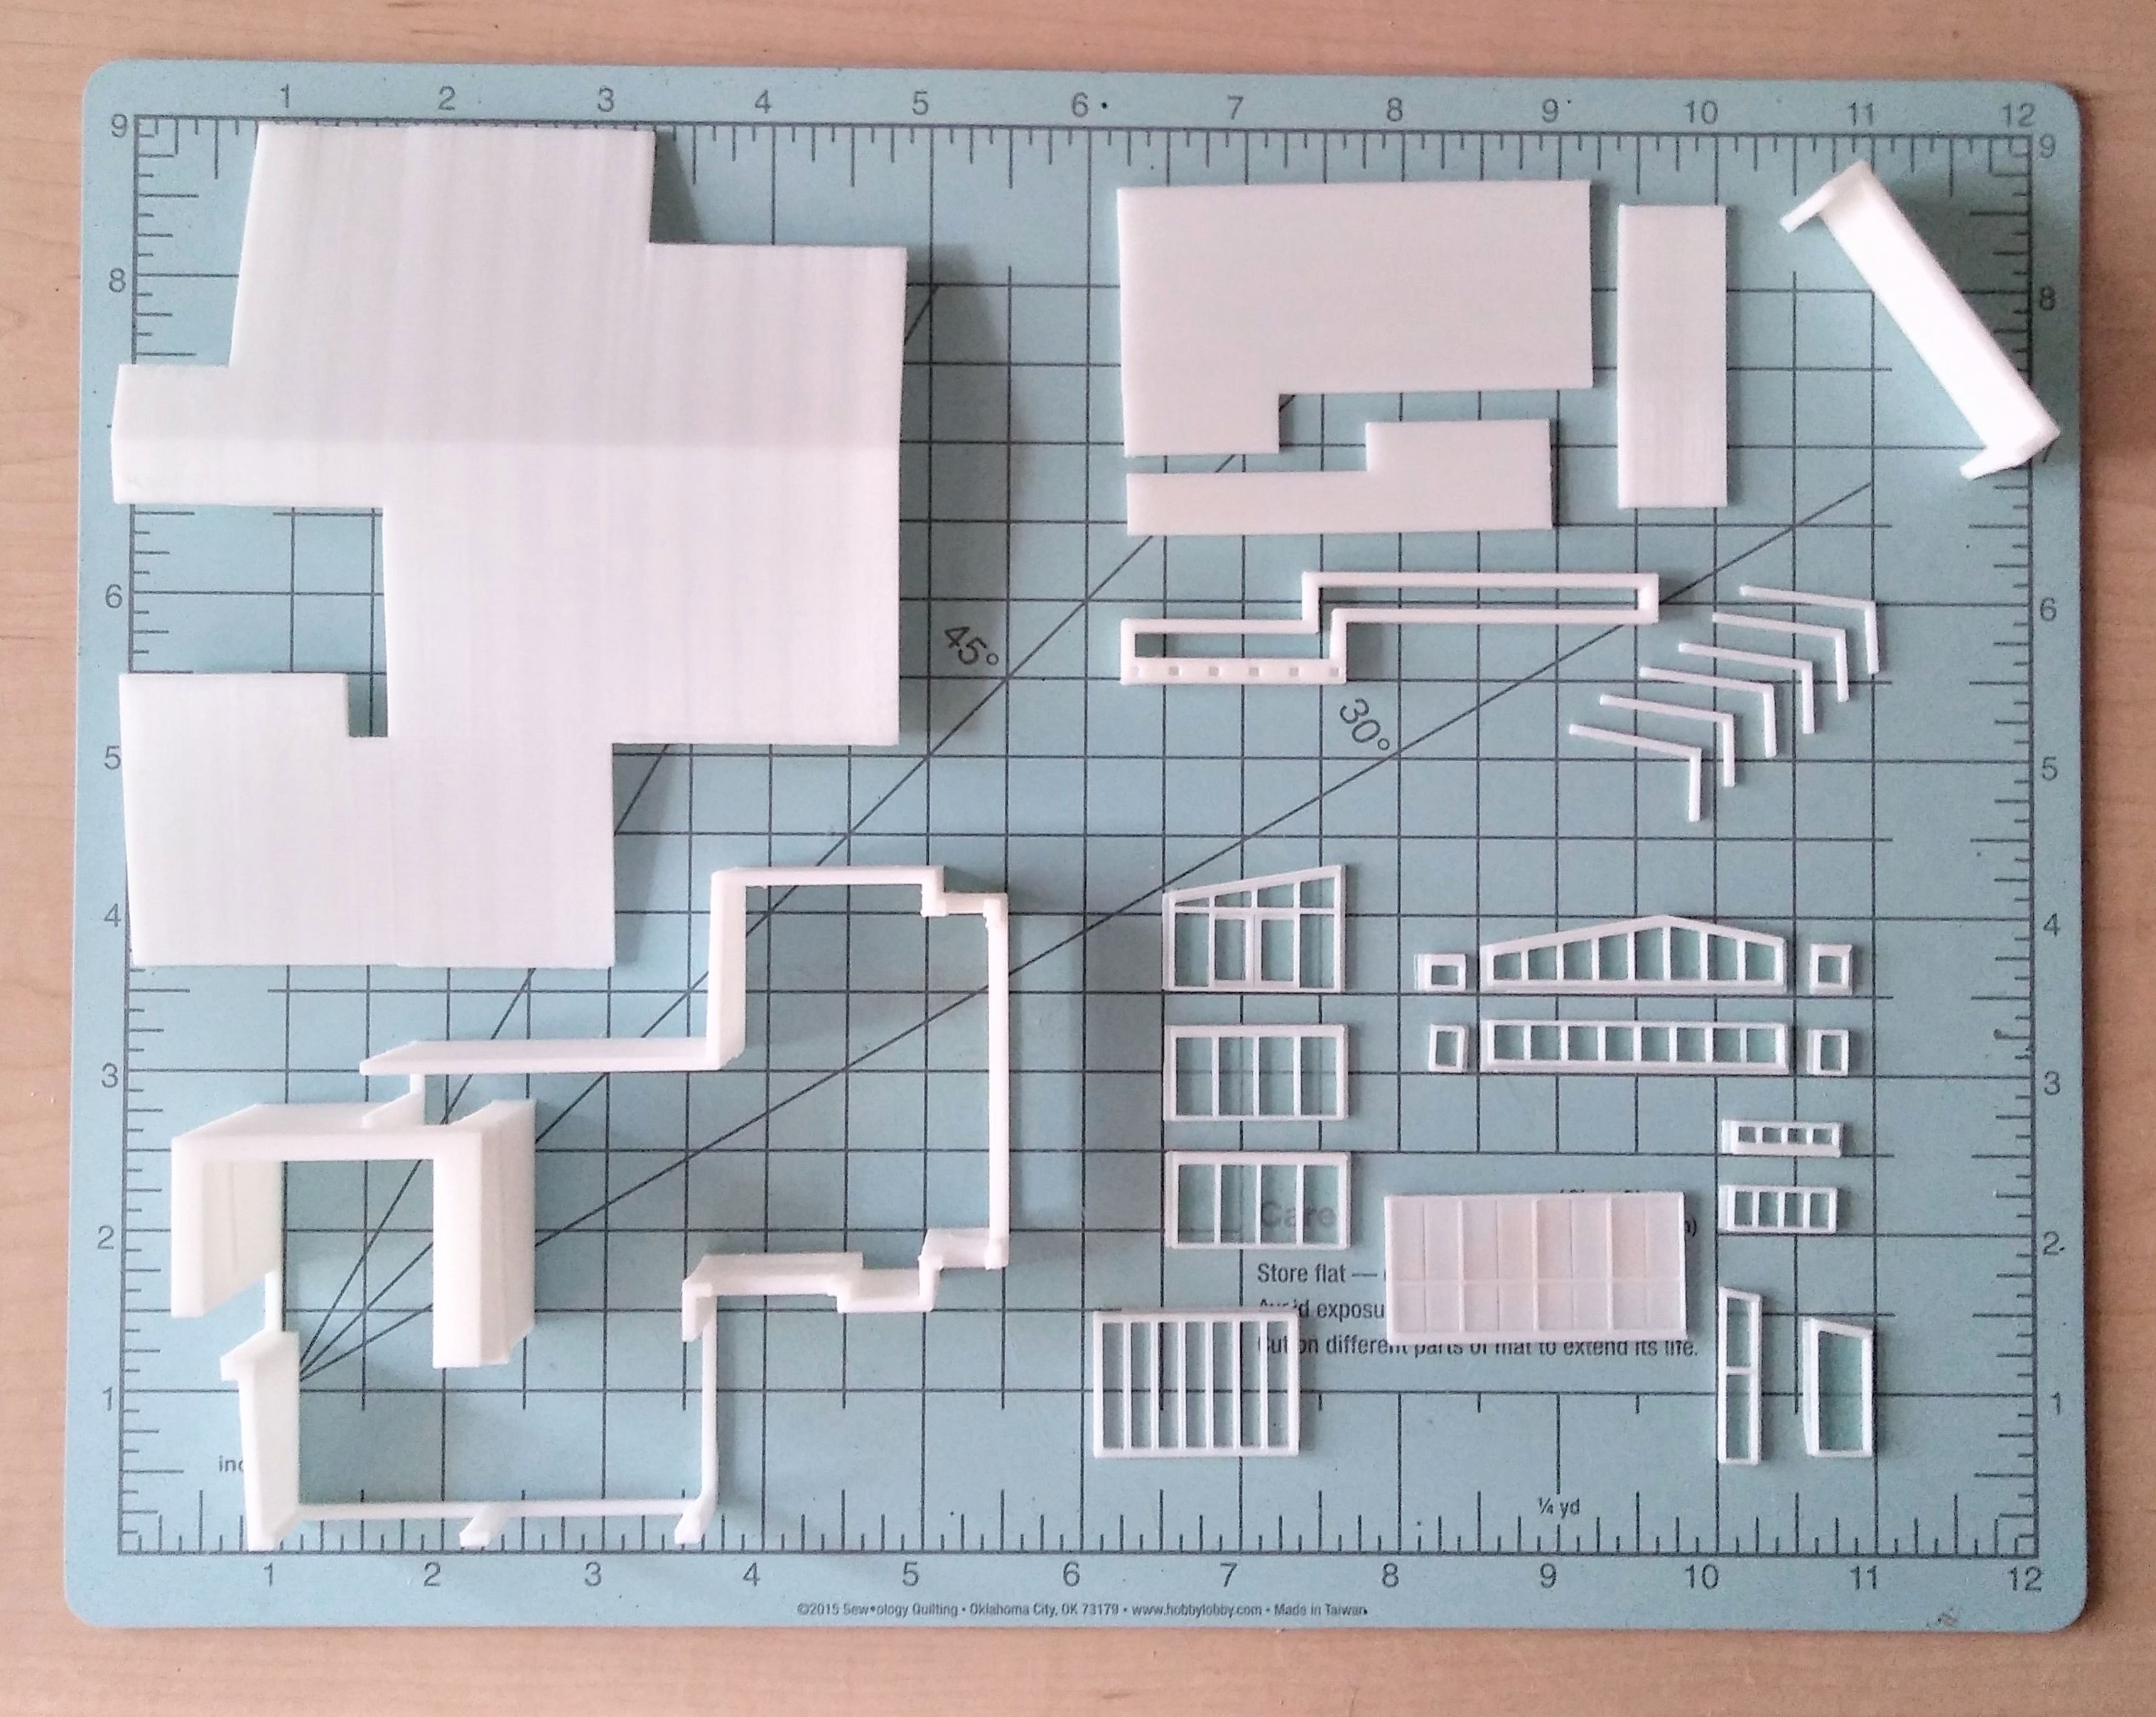 20th Century 3 Story BLOCK SHOPS Building N Scale 1:160-3D PRINTED Model USA 